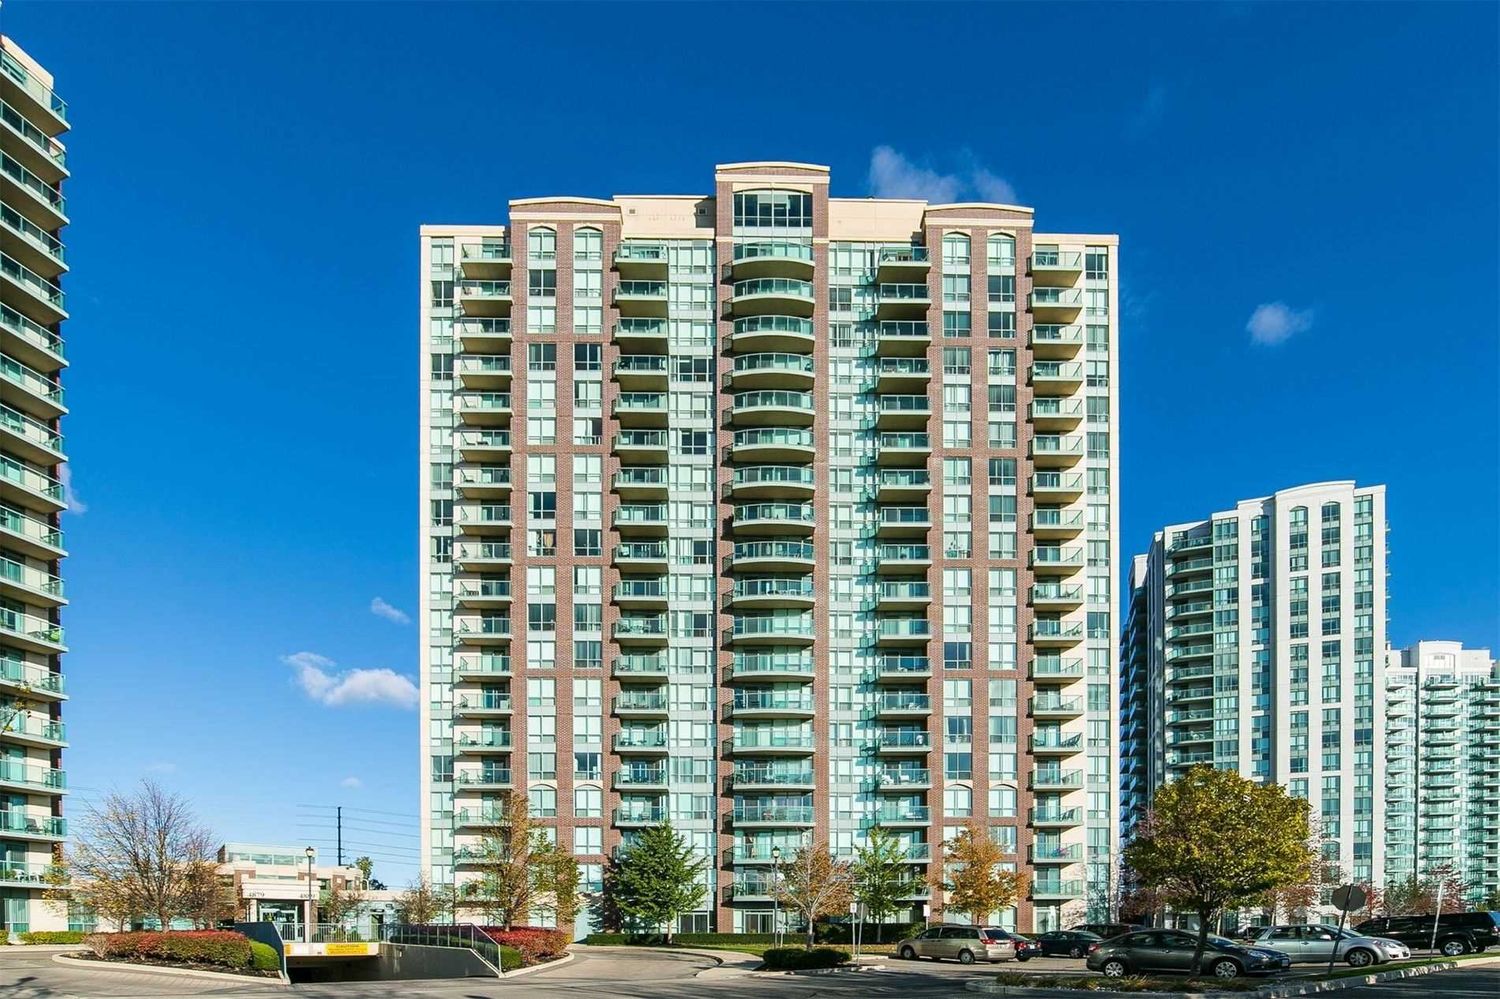 4889 Kimbermount Avenue. Papillon Place II Condos is located in  Mississauga, Toronto - image #1 of 2